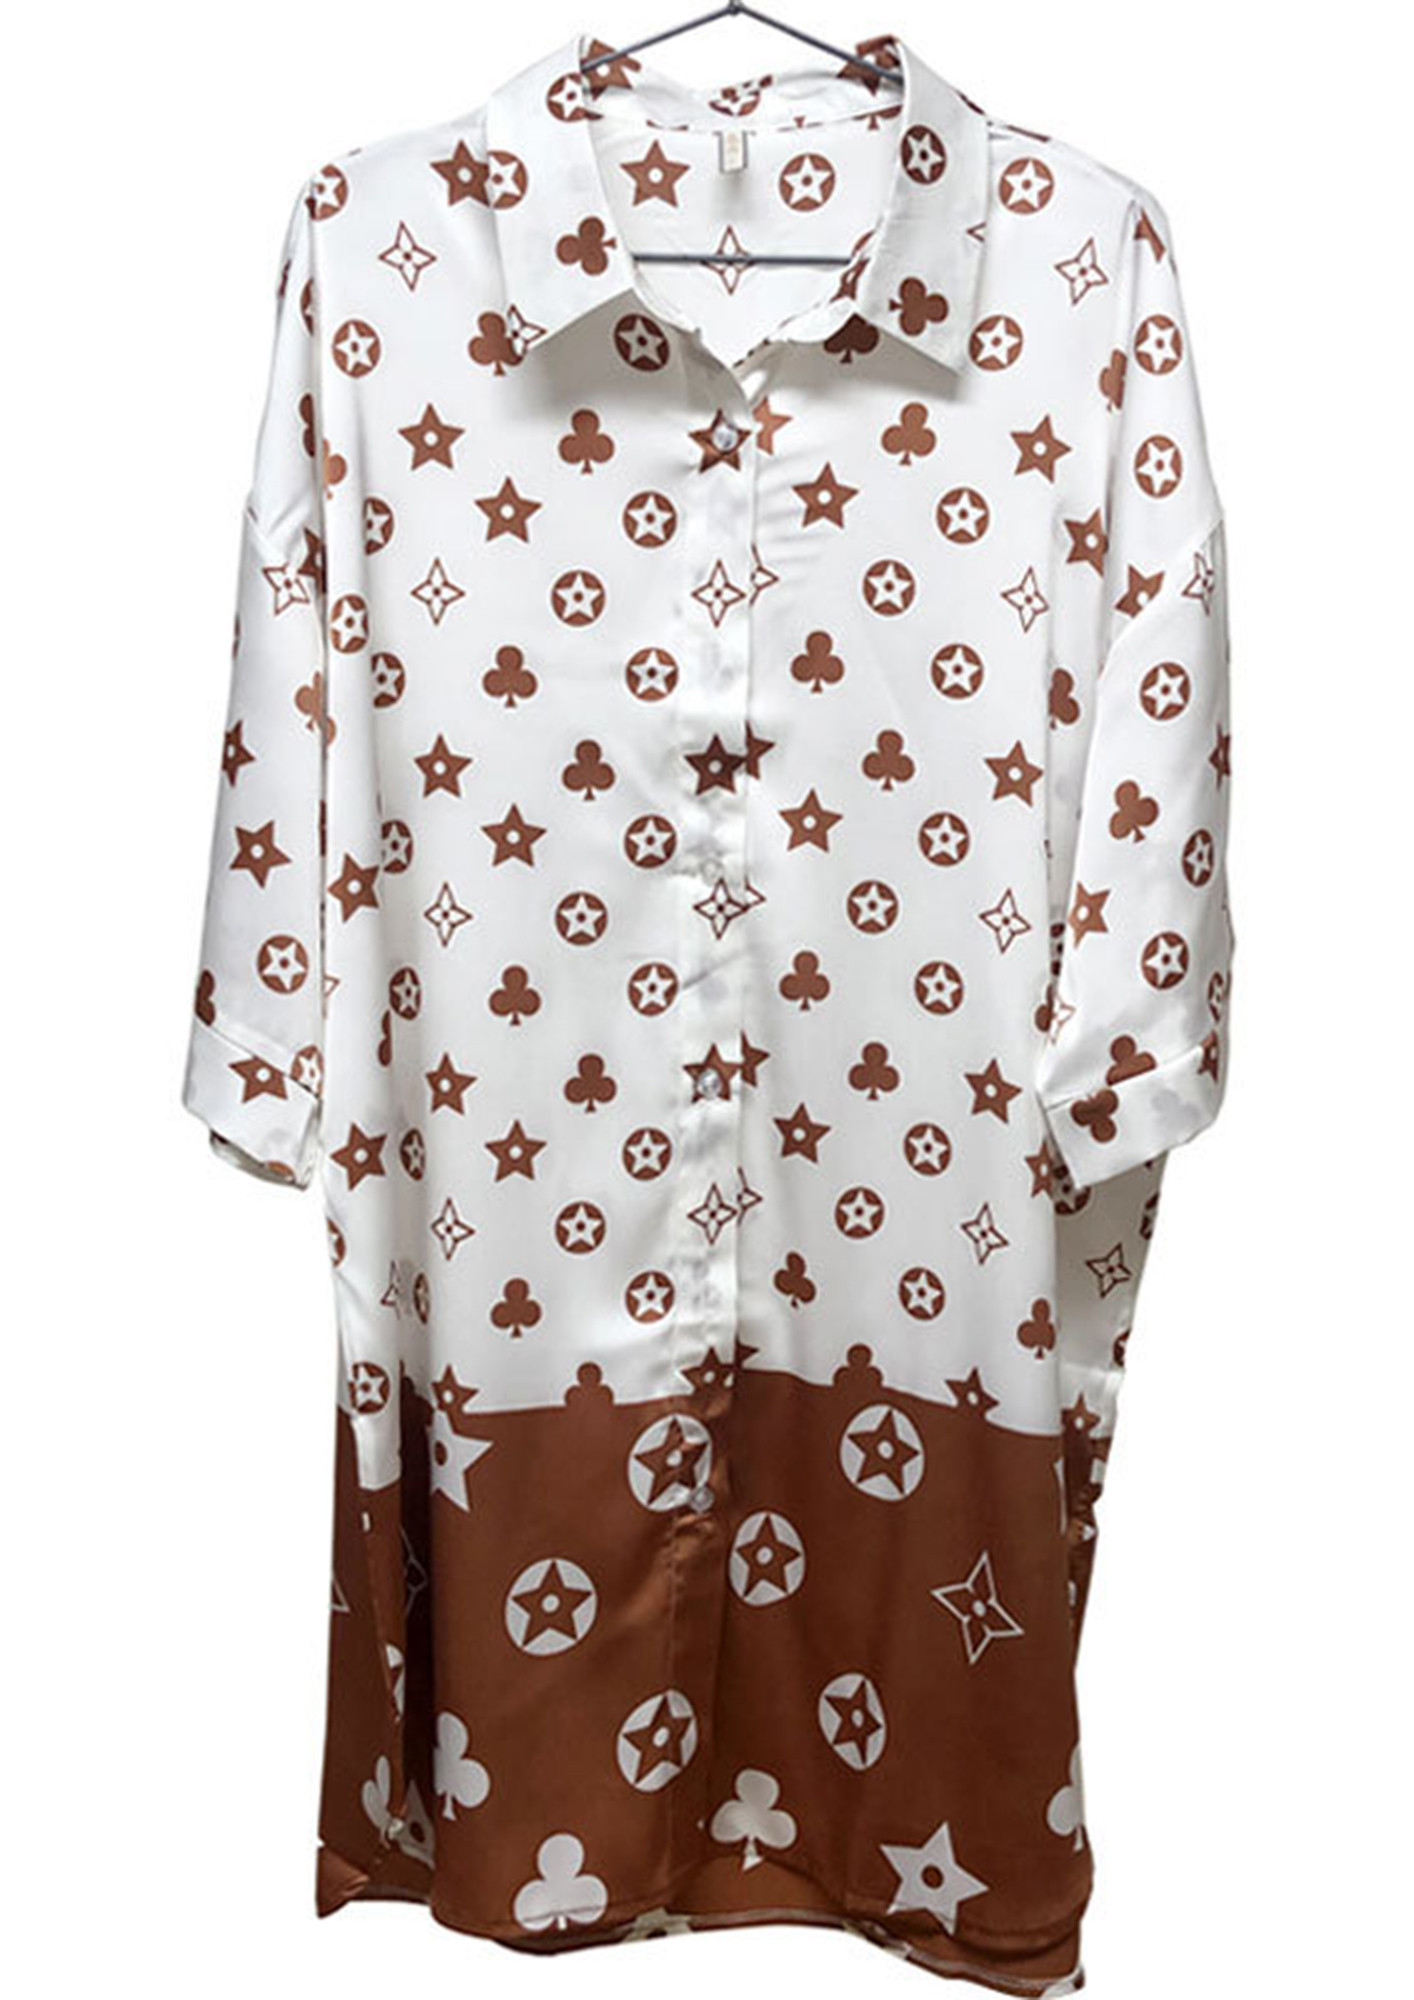 BEEN THINKIN OF YOU WHITE AND BROWN NIGHTSHIRT